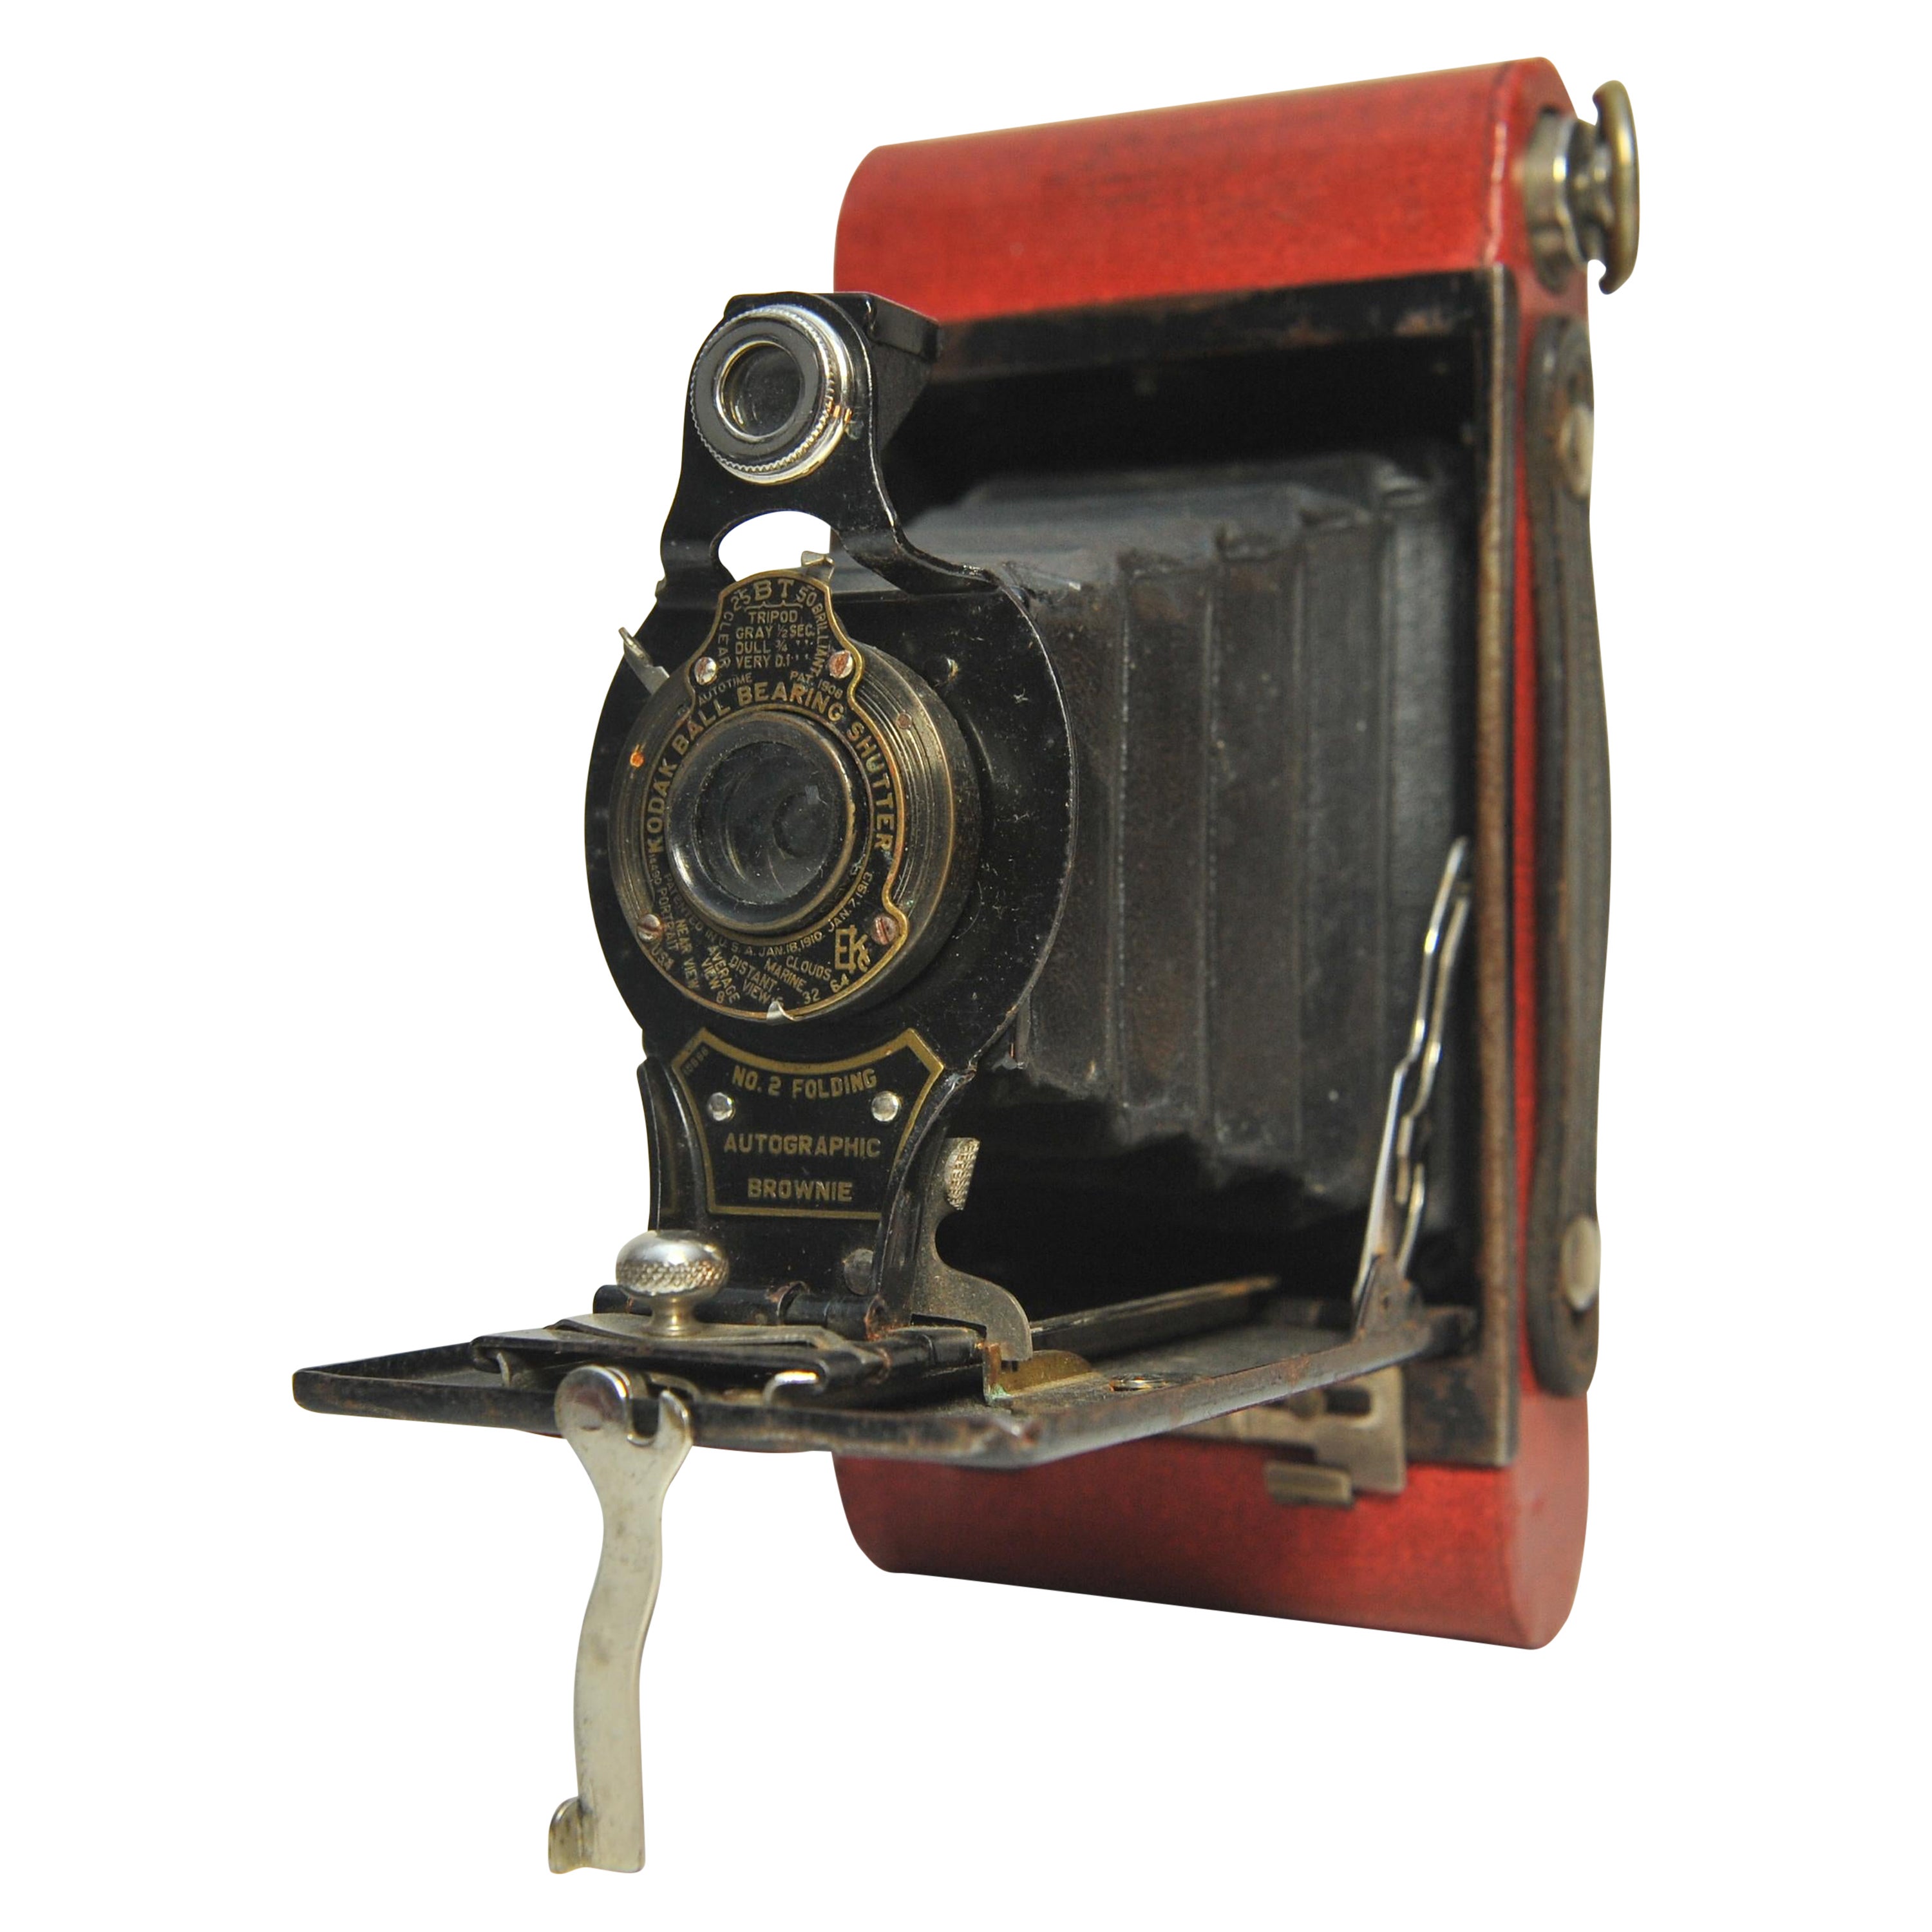 Eastman Kodak No 2 Folding Autographic Brownie Folding Bellow Camera In Red For Sale